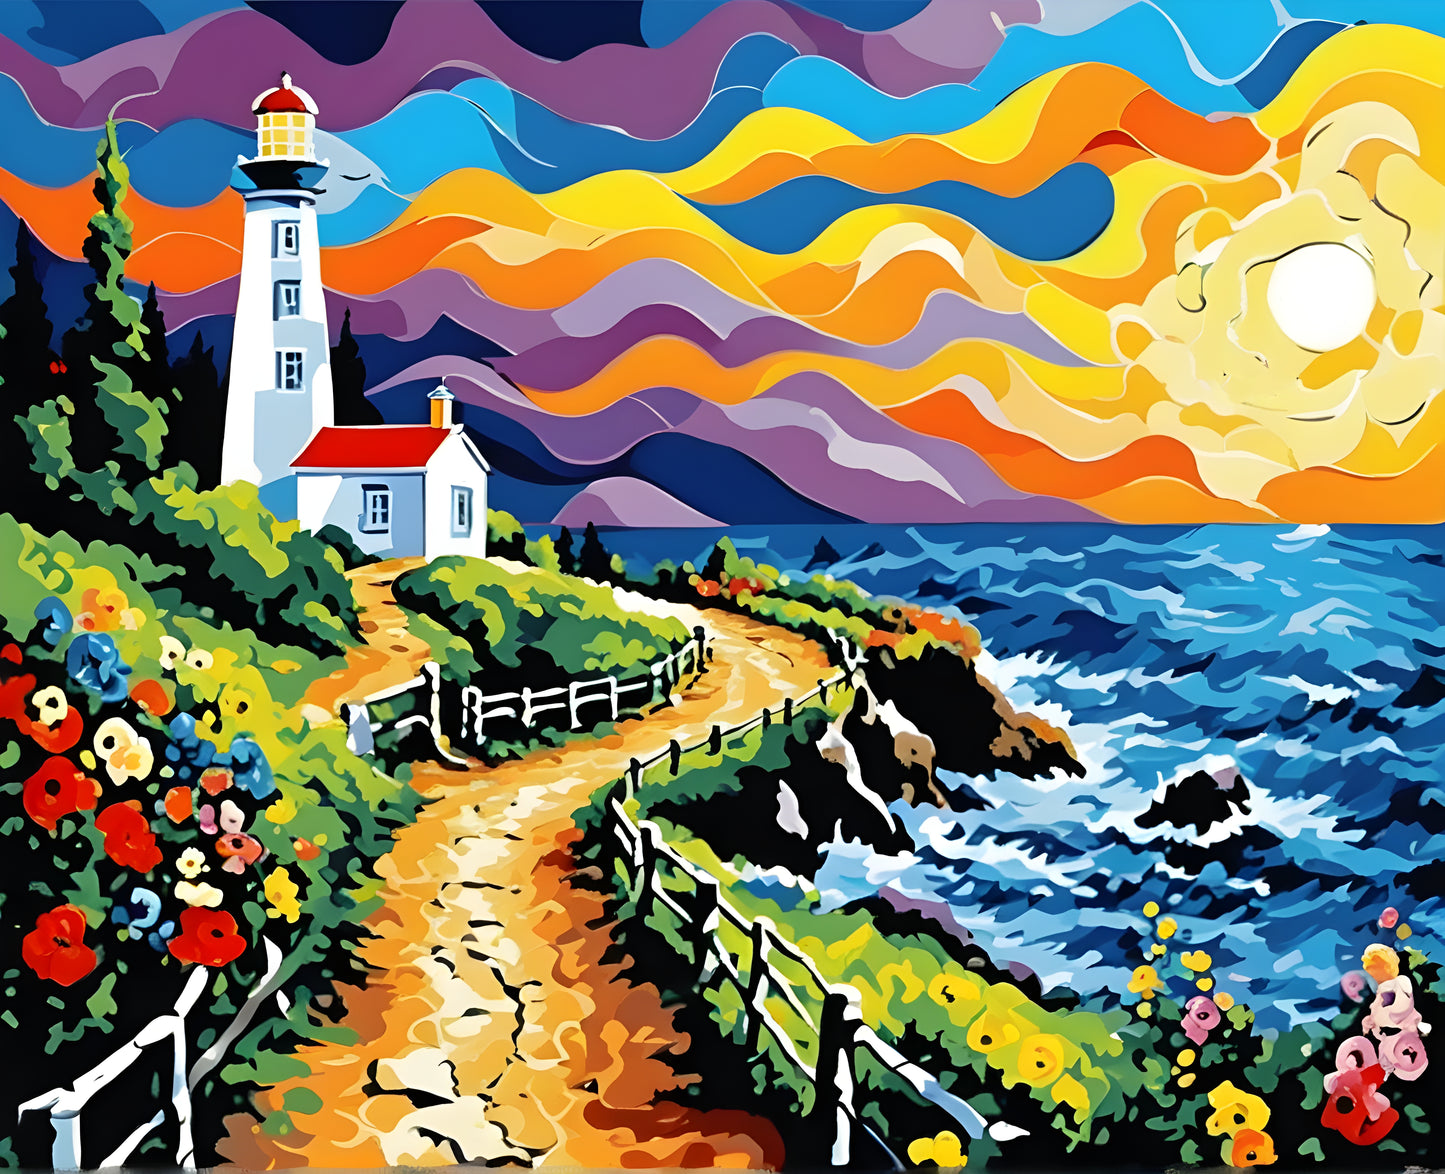 A Trail To The Lighthouse - Van-Go Paint-By-Number Kit